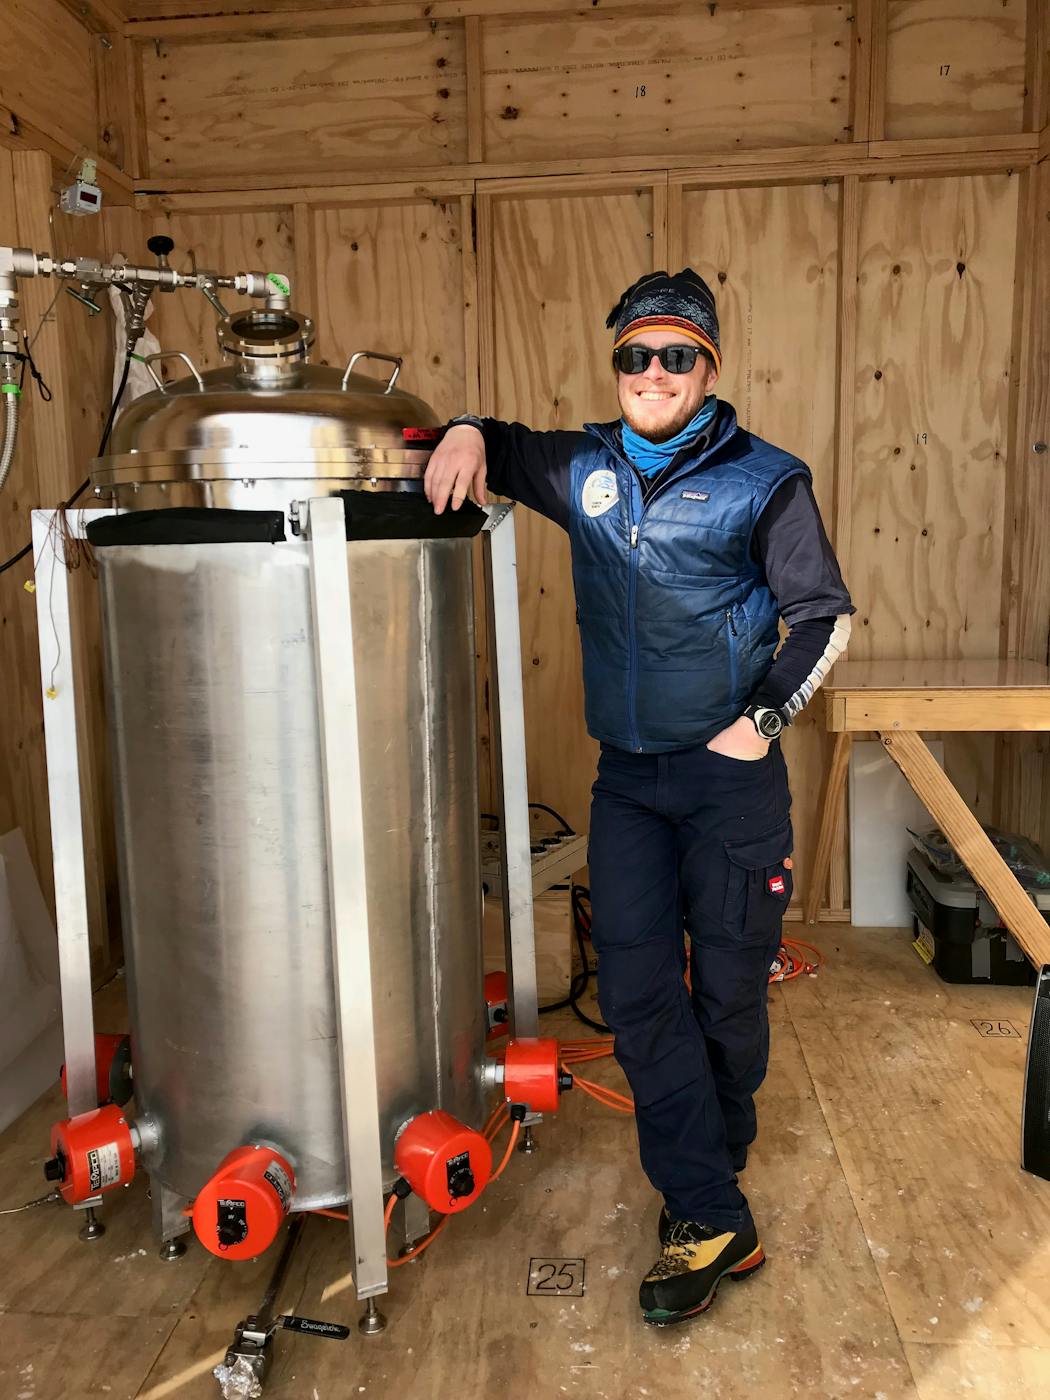 Glaciologist and climate scientist Peter Neff next to a custom-built ice melter during a joint U.S.-Australian expedition to Antarctica in the 2018-2019 research season.